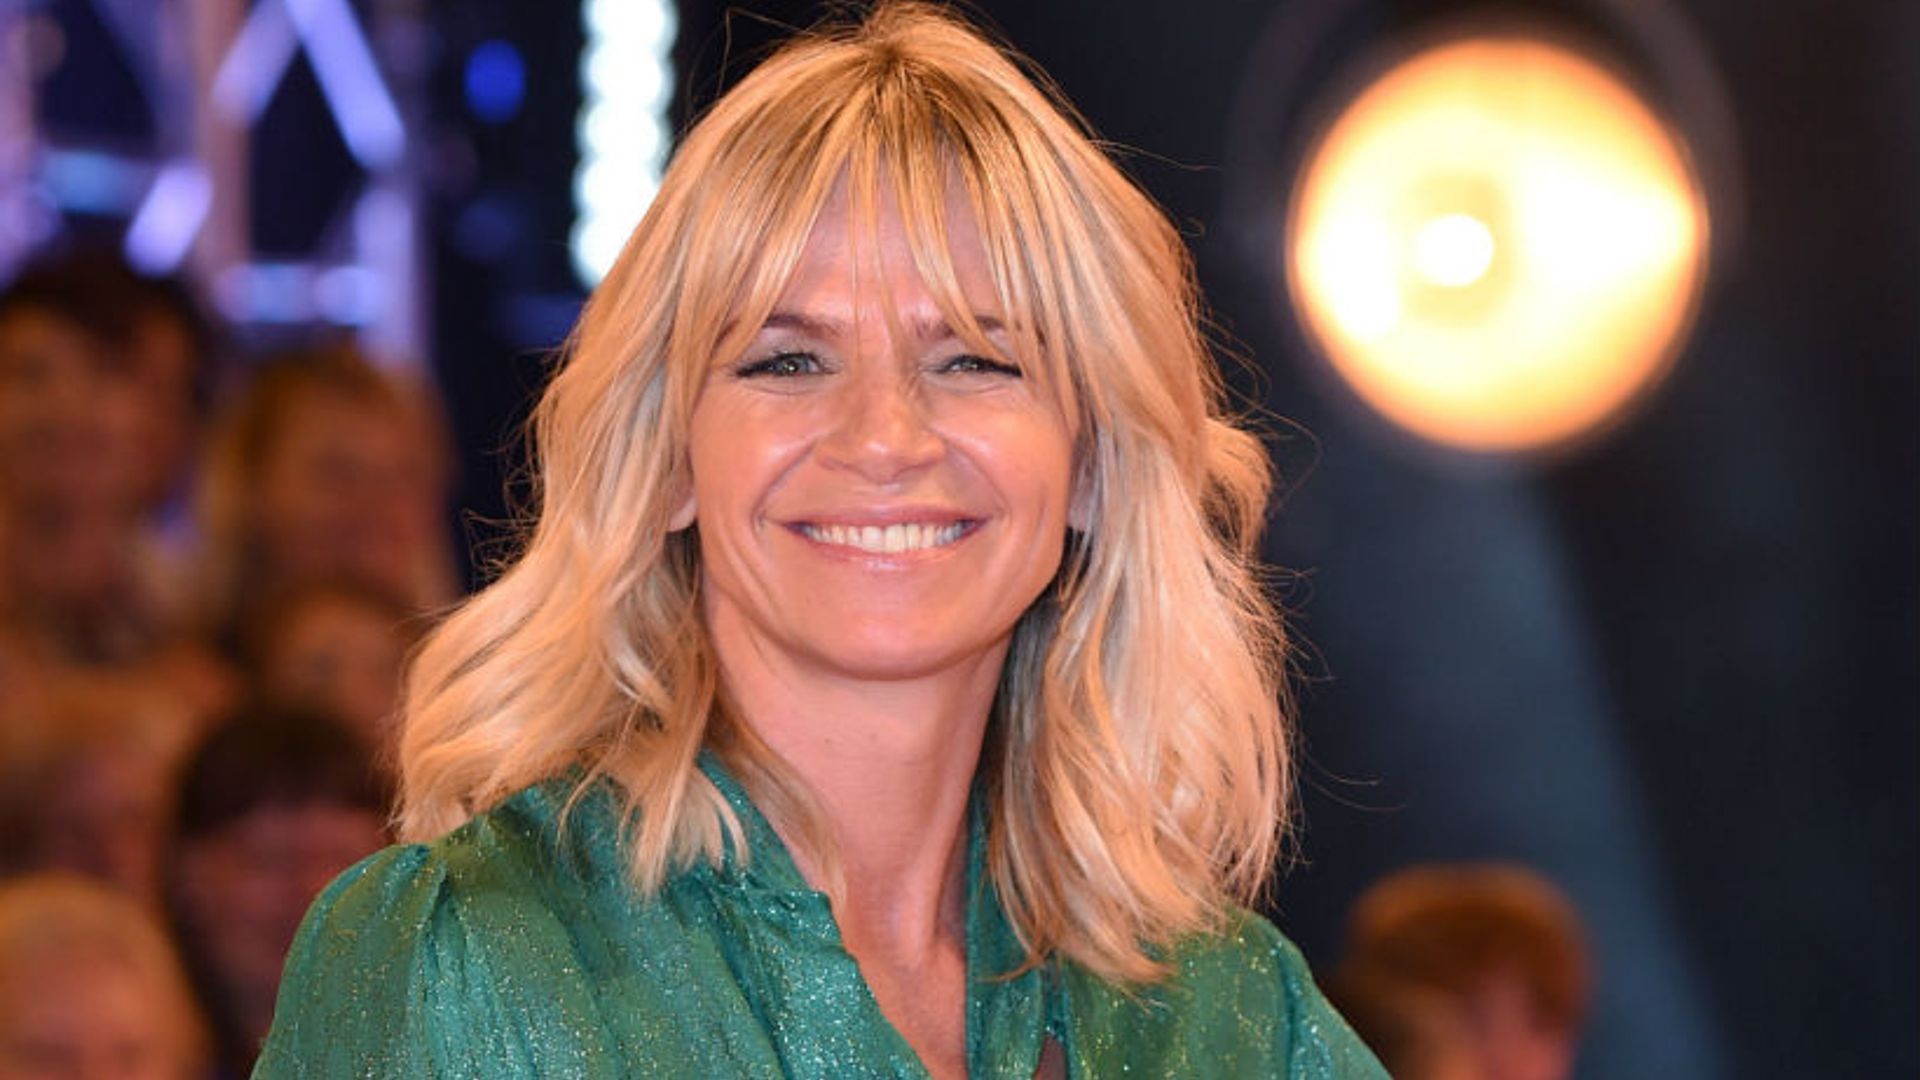 strictly come dancing zoe ball